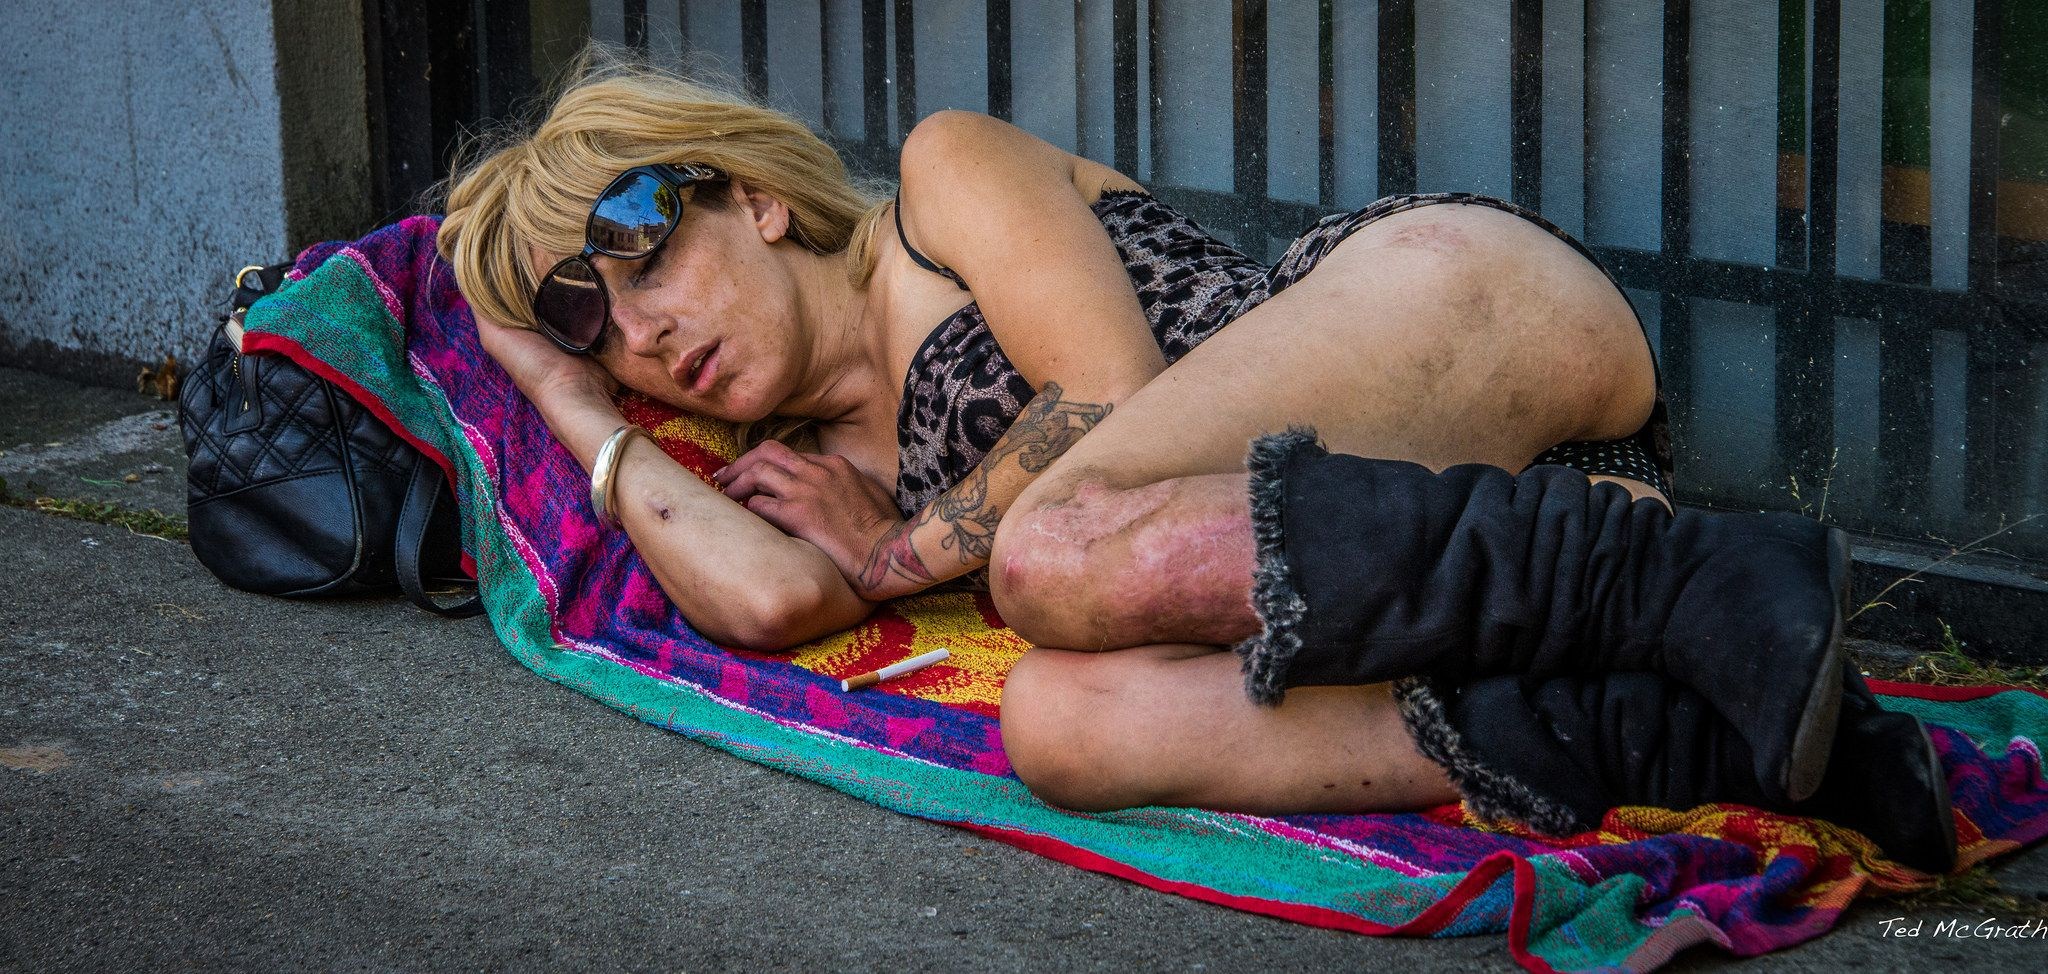 Fucking a Drunk Homeless Woman in Close-Up (81 photos)